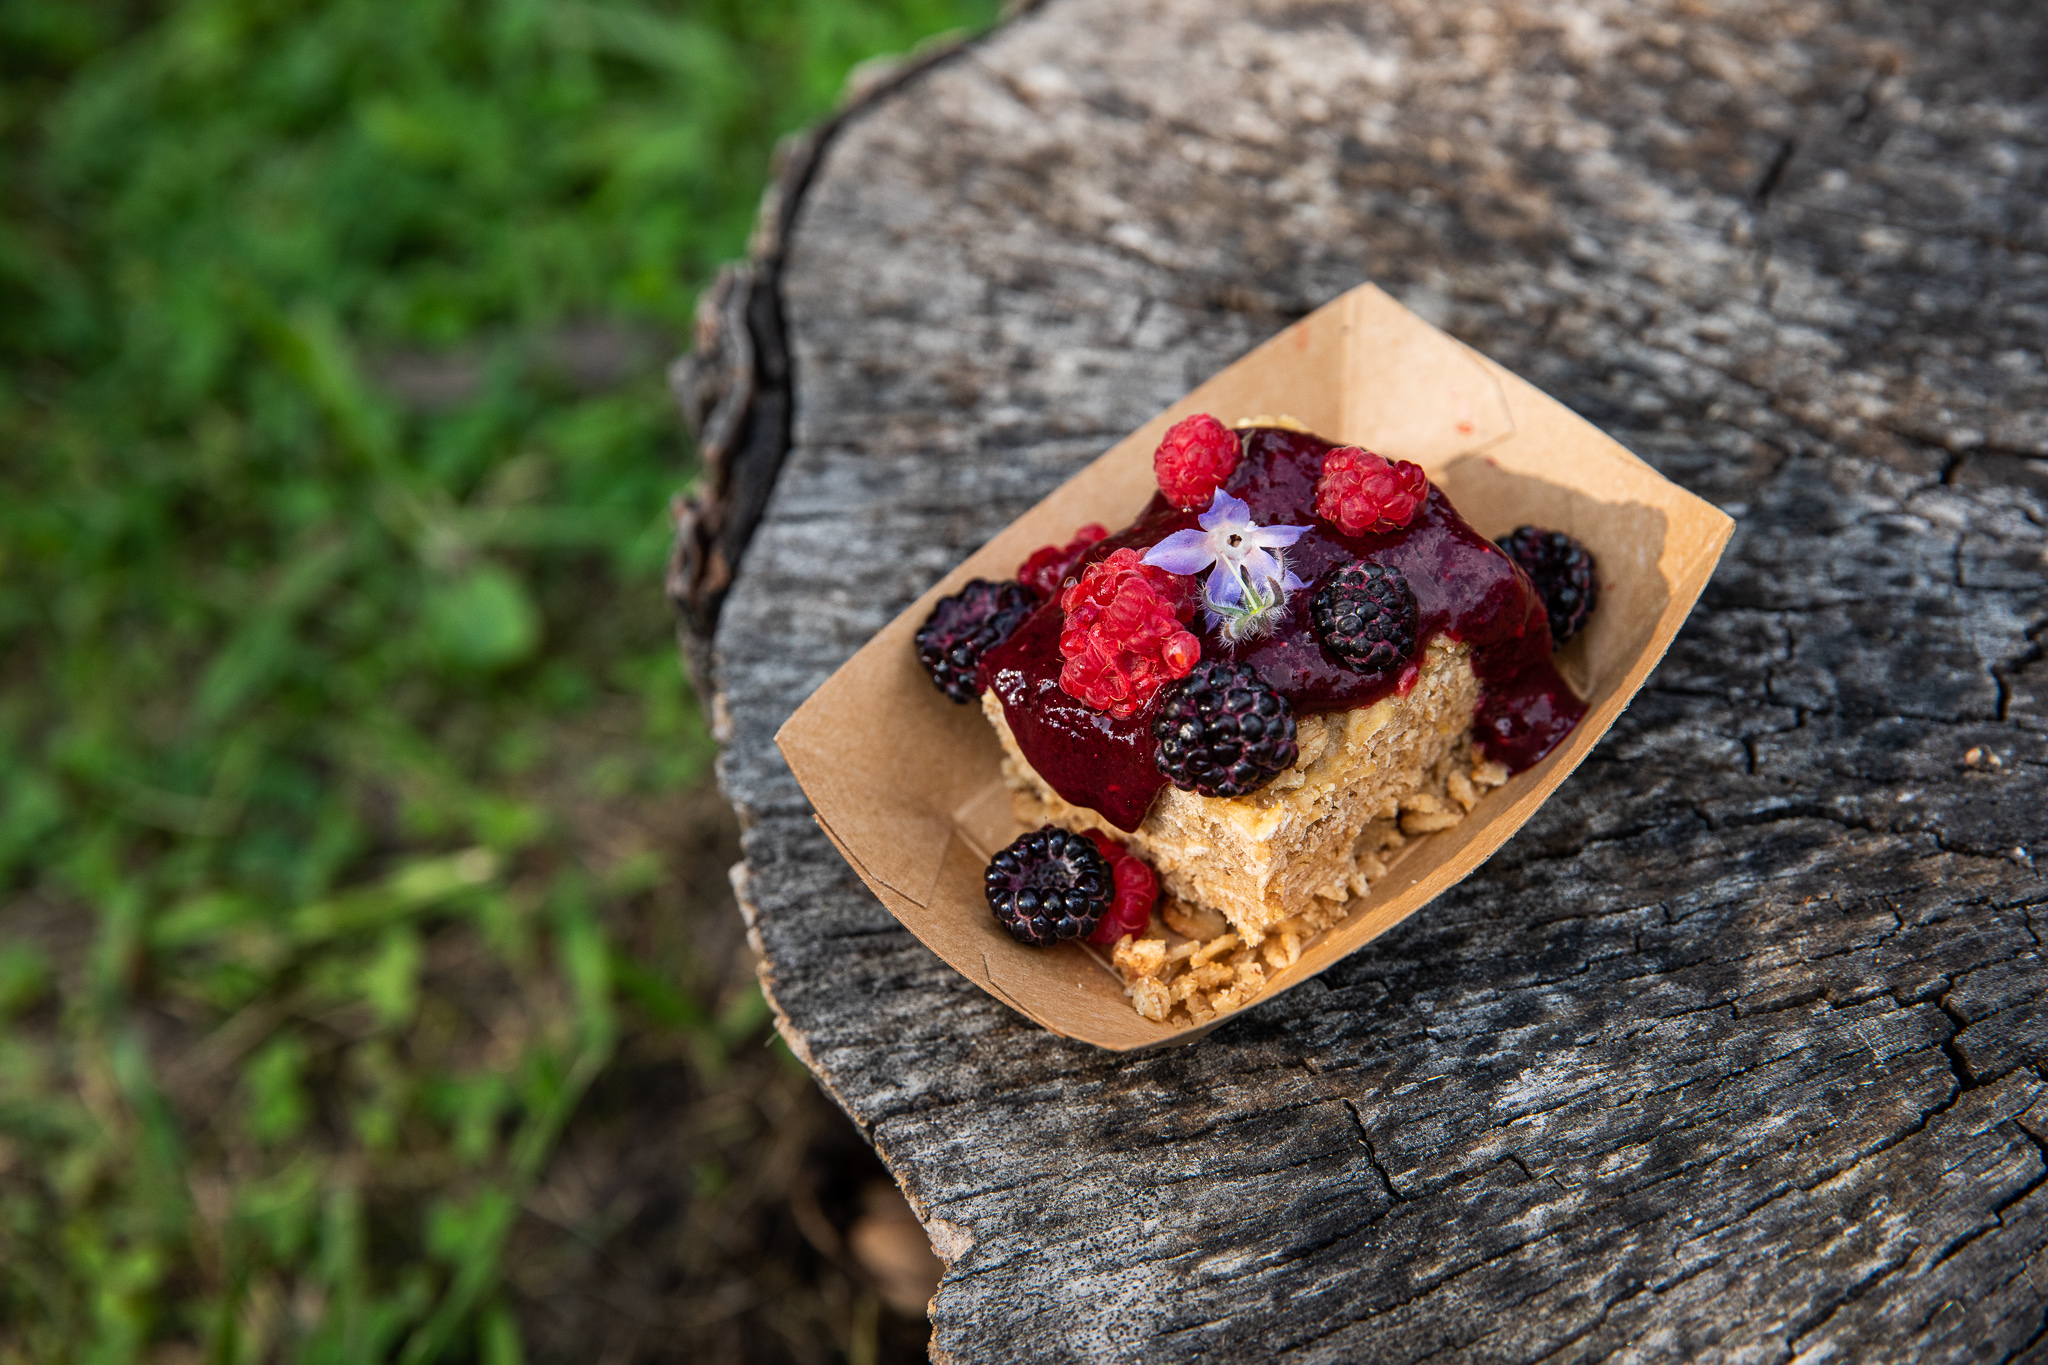 A brown paper boat filled with a slice of cake covered in fruit compote and whole raspberries and blackberries sits on a tree stump.